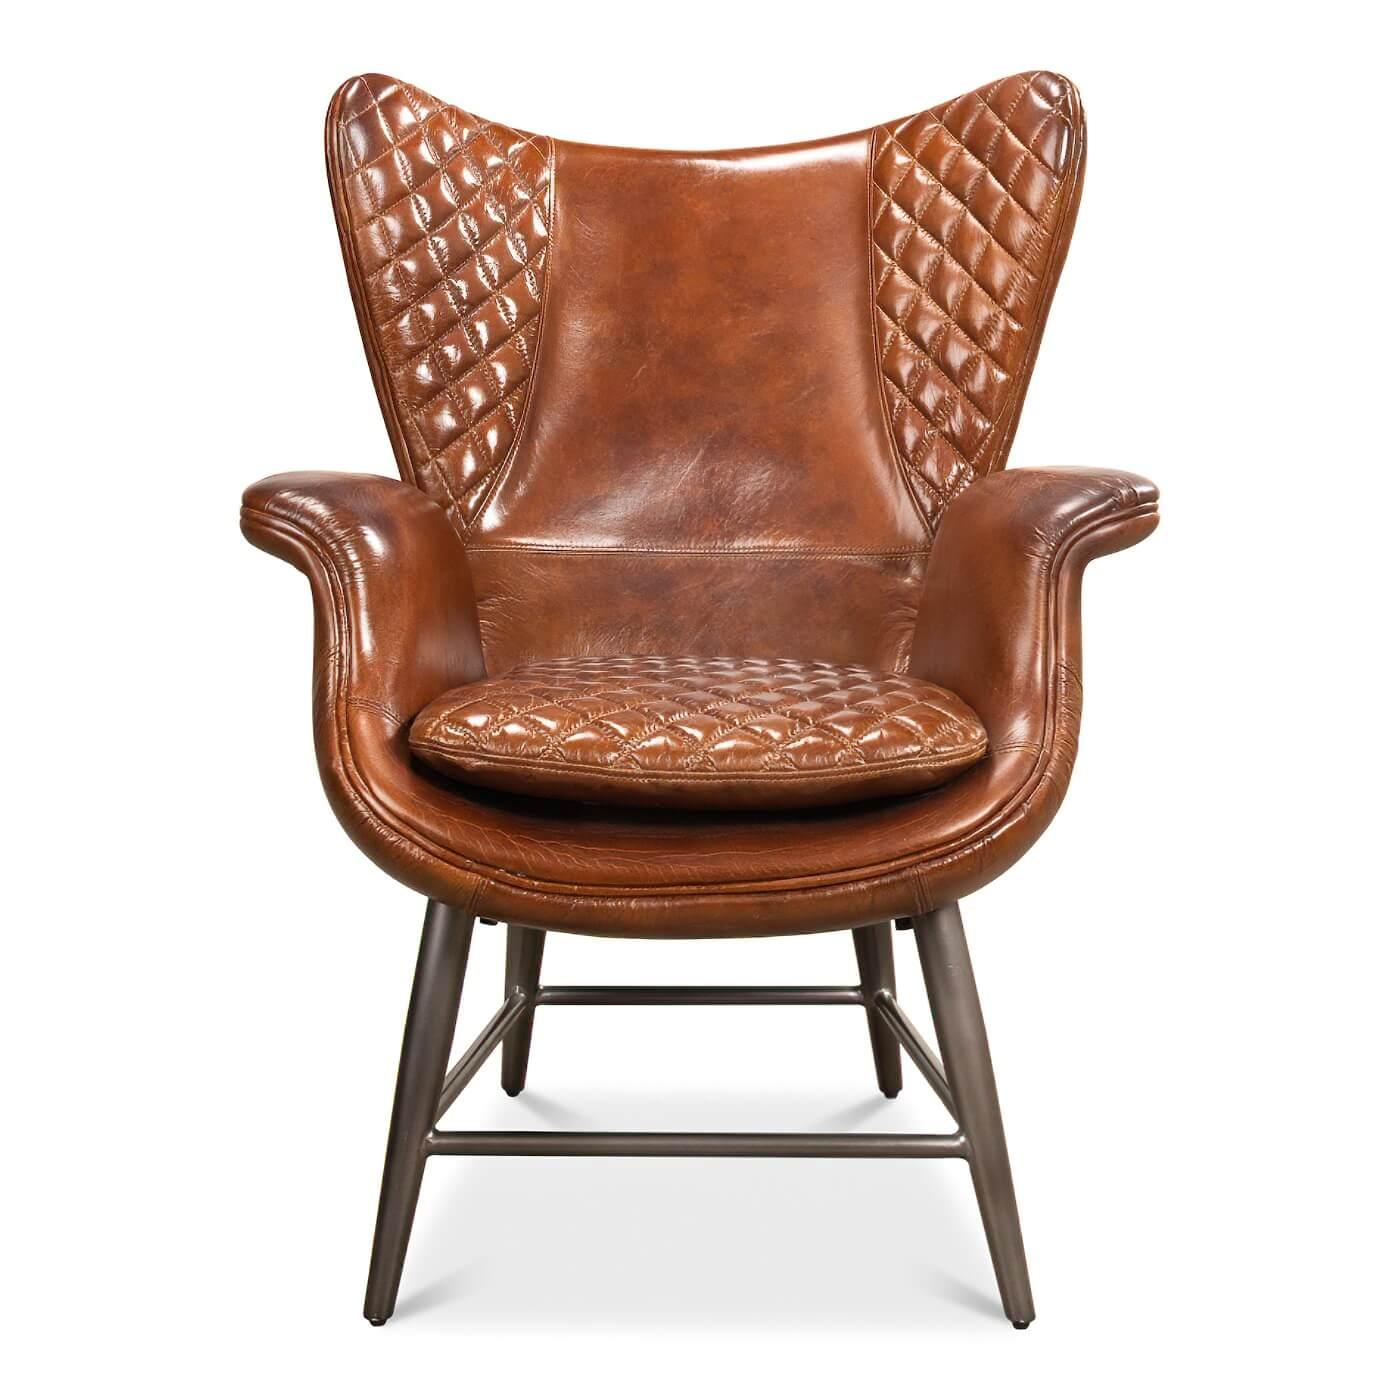 A modern quilted brown leather armchair with a curved back and arms. This chair is detailed with topstitched seams, self-welt, and quilting. It rests on metal legs for a mid-century meets industrial look. 

Dimension
31 in. W x 31 in. D x 40 in. H